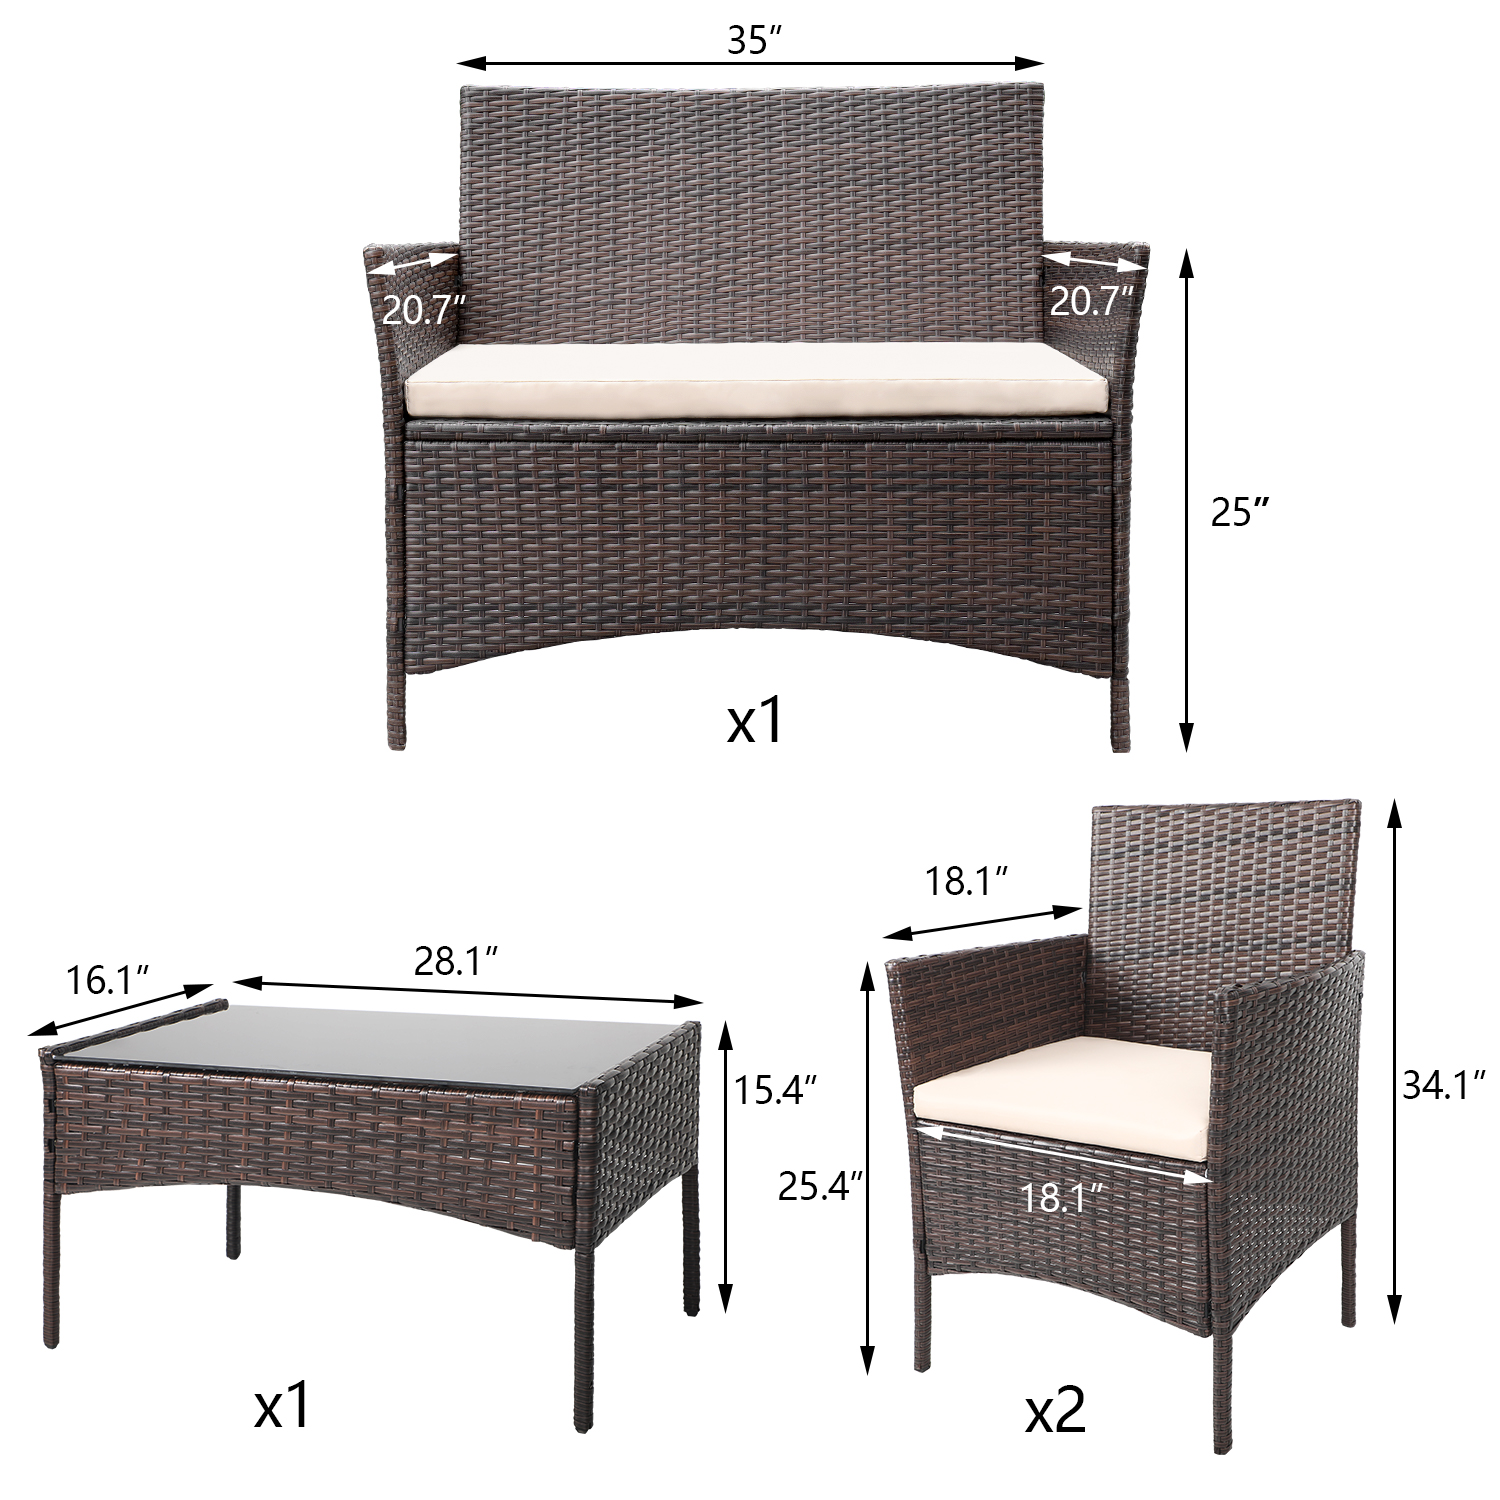 Lacoo 4 Pieces Outdoor Patio Furniture Sets Rattan Chair Wicker Set for Backyard Porch Garden Poolside Balcony - image 3 of 5